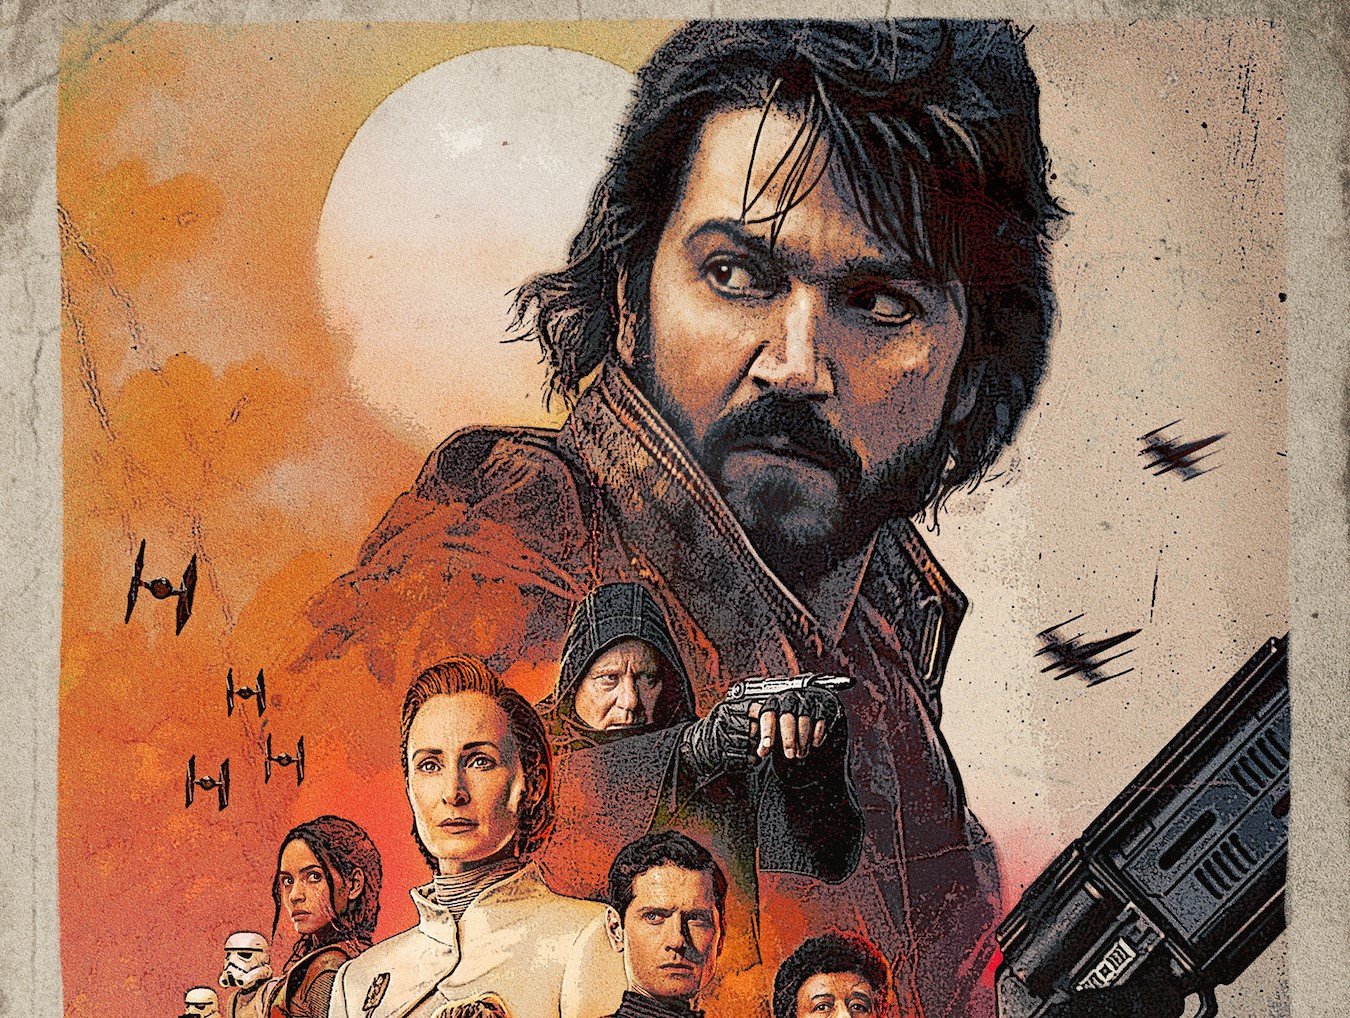 Key art for 'Andor' for our article about the show's episode count and release schedule on Disney+. It features Diego Luna as Cassian Andor and several other prominent characters. There's a moon behind them, and the background is orange and white.